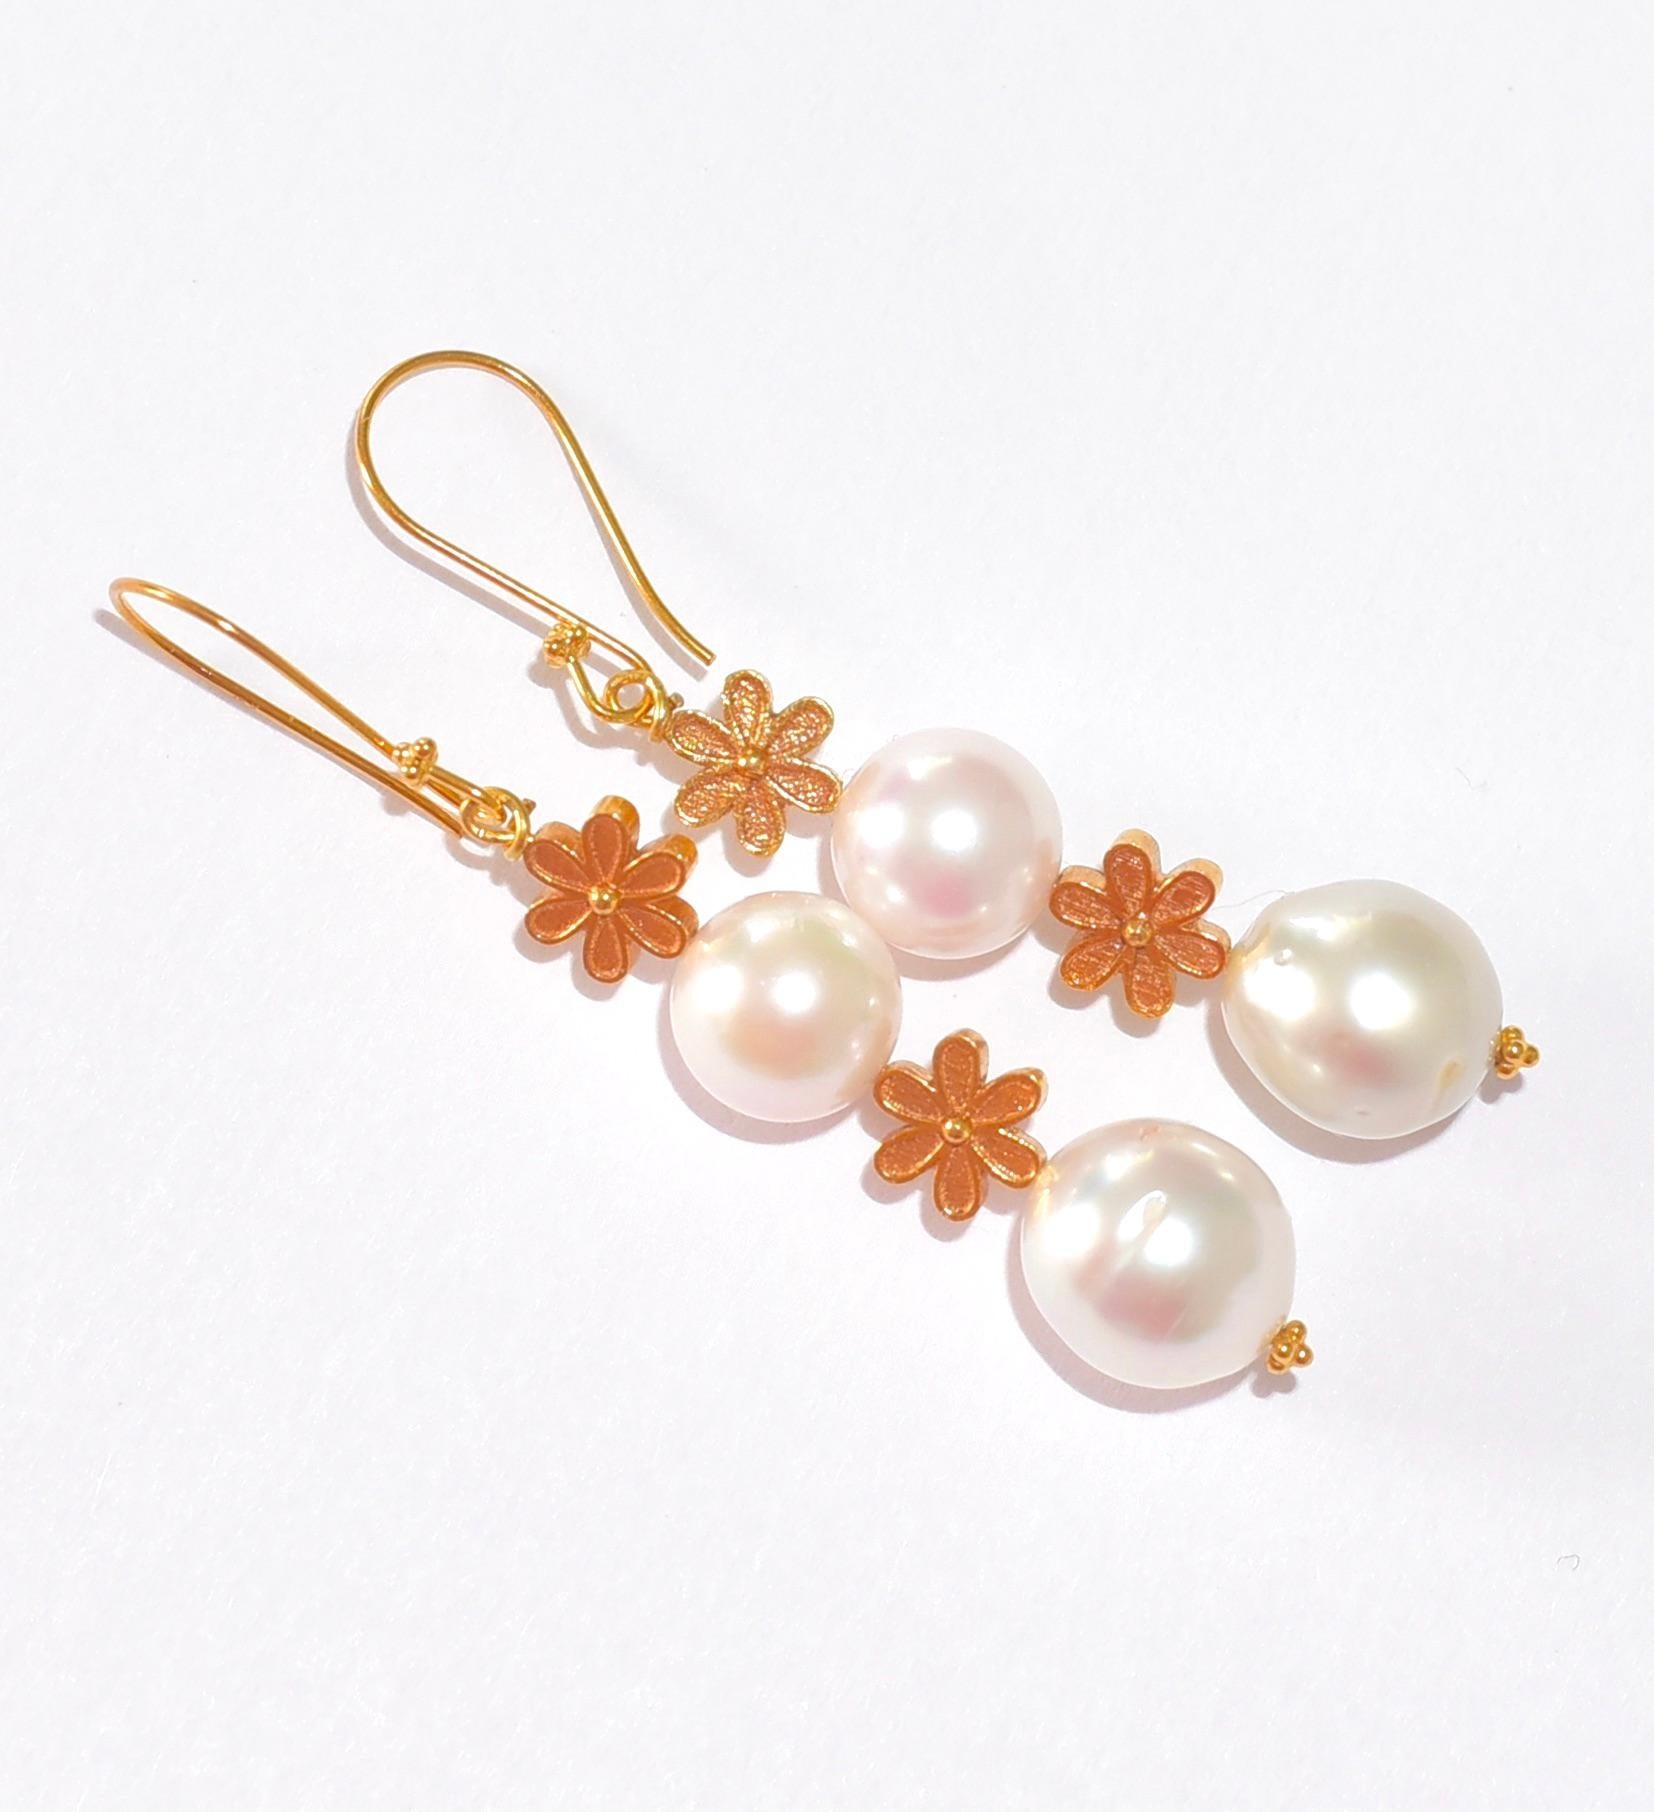 Round Cut South Sea Pearl, Akoya Pearl Earrings in 18K Solid Yellow Gold